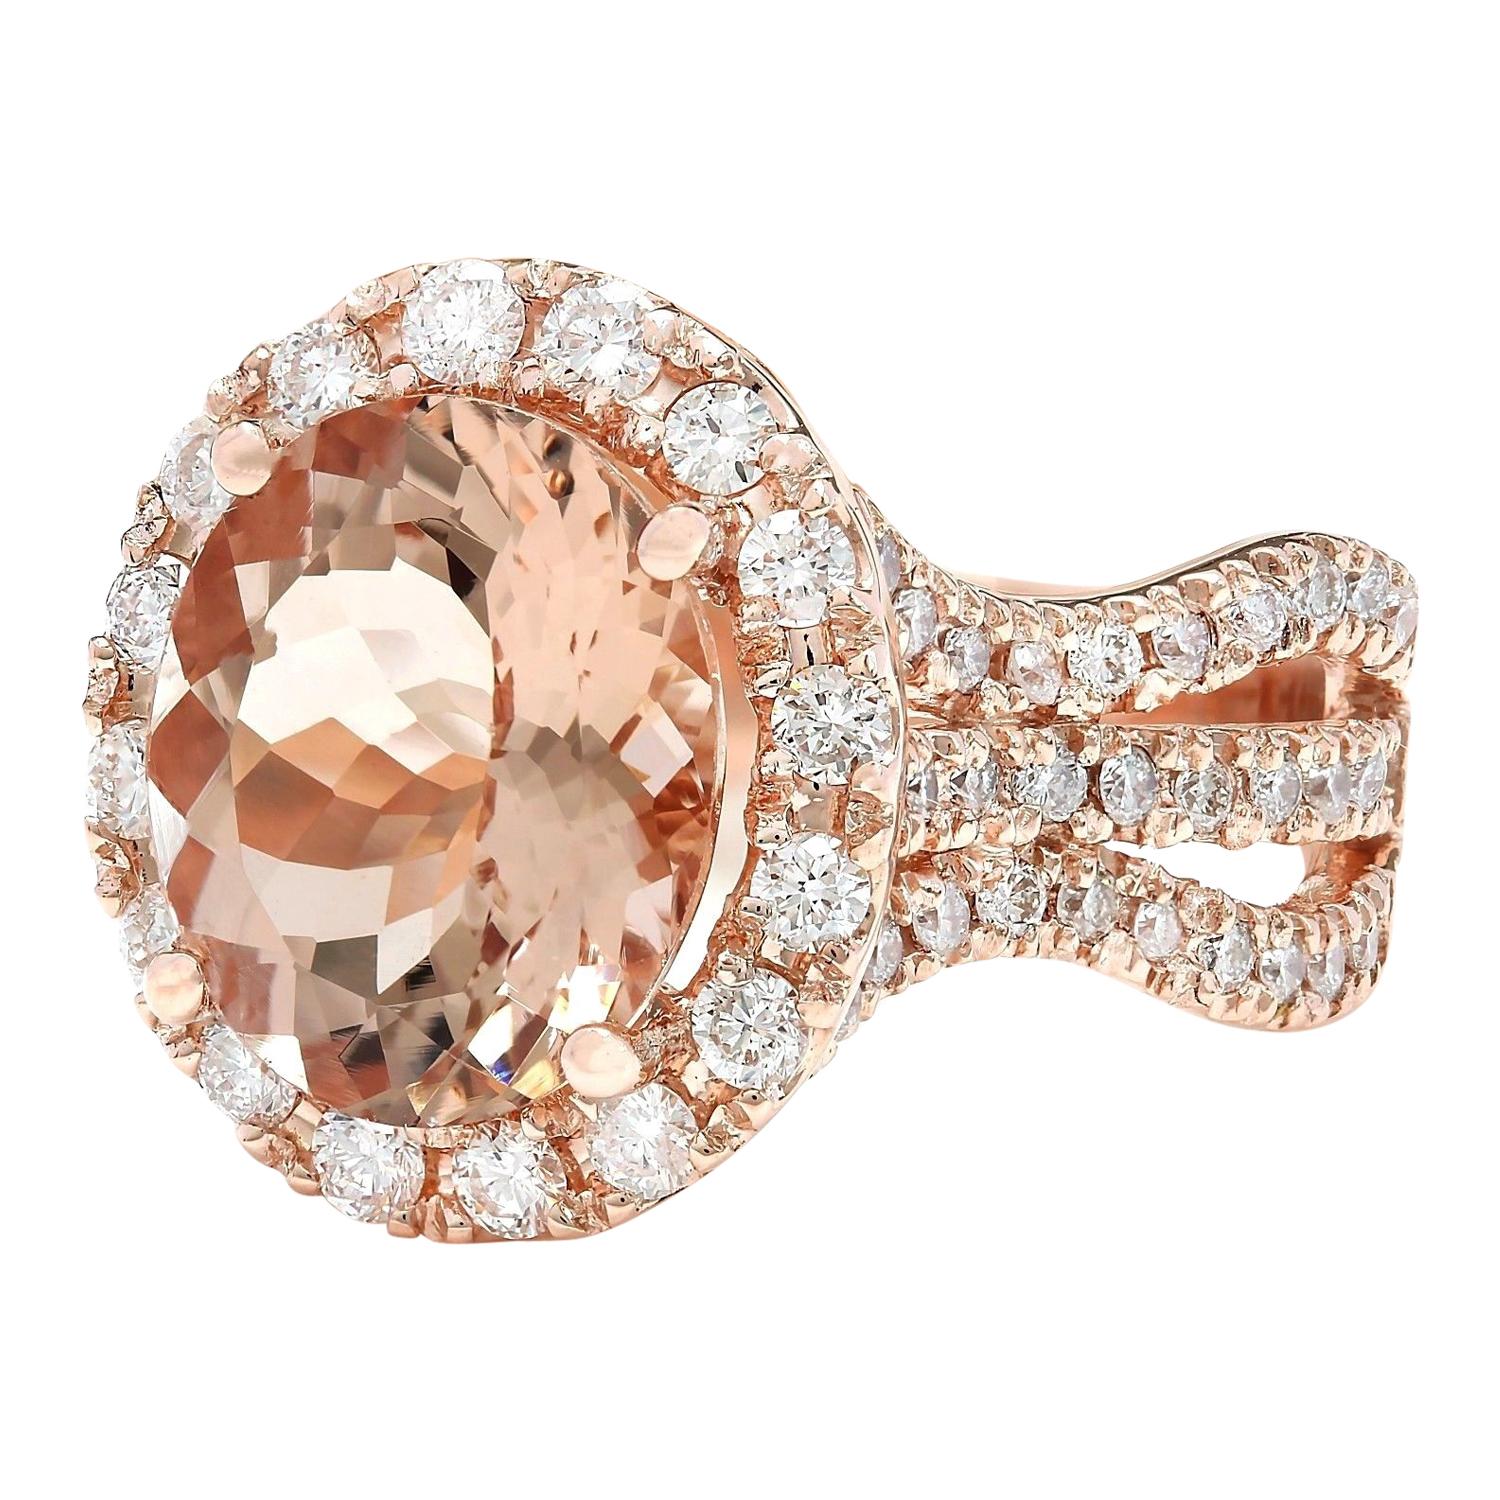 5.29 Carat Natural Morganite 18K Solid Rose Gold Diamond Ring
 Item Type: Ring
 Item Style: Cocktail
 Material: 18K Rose Gold
 Mainstone: Morganite
 Stone Color: Peach
 Stone Weight: 4.14 Carat
 Stone Shape: Oval
 Stone Quantity: 1
 Stone